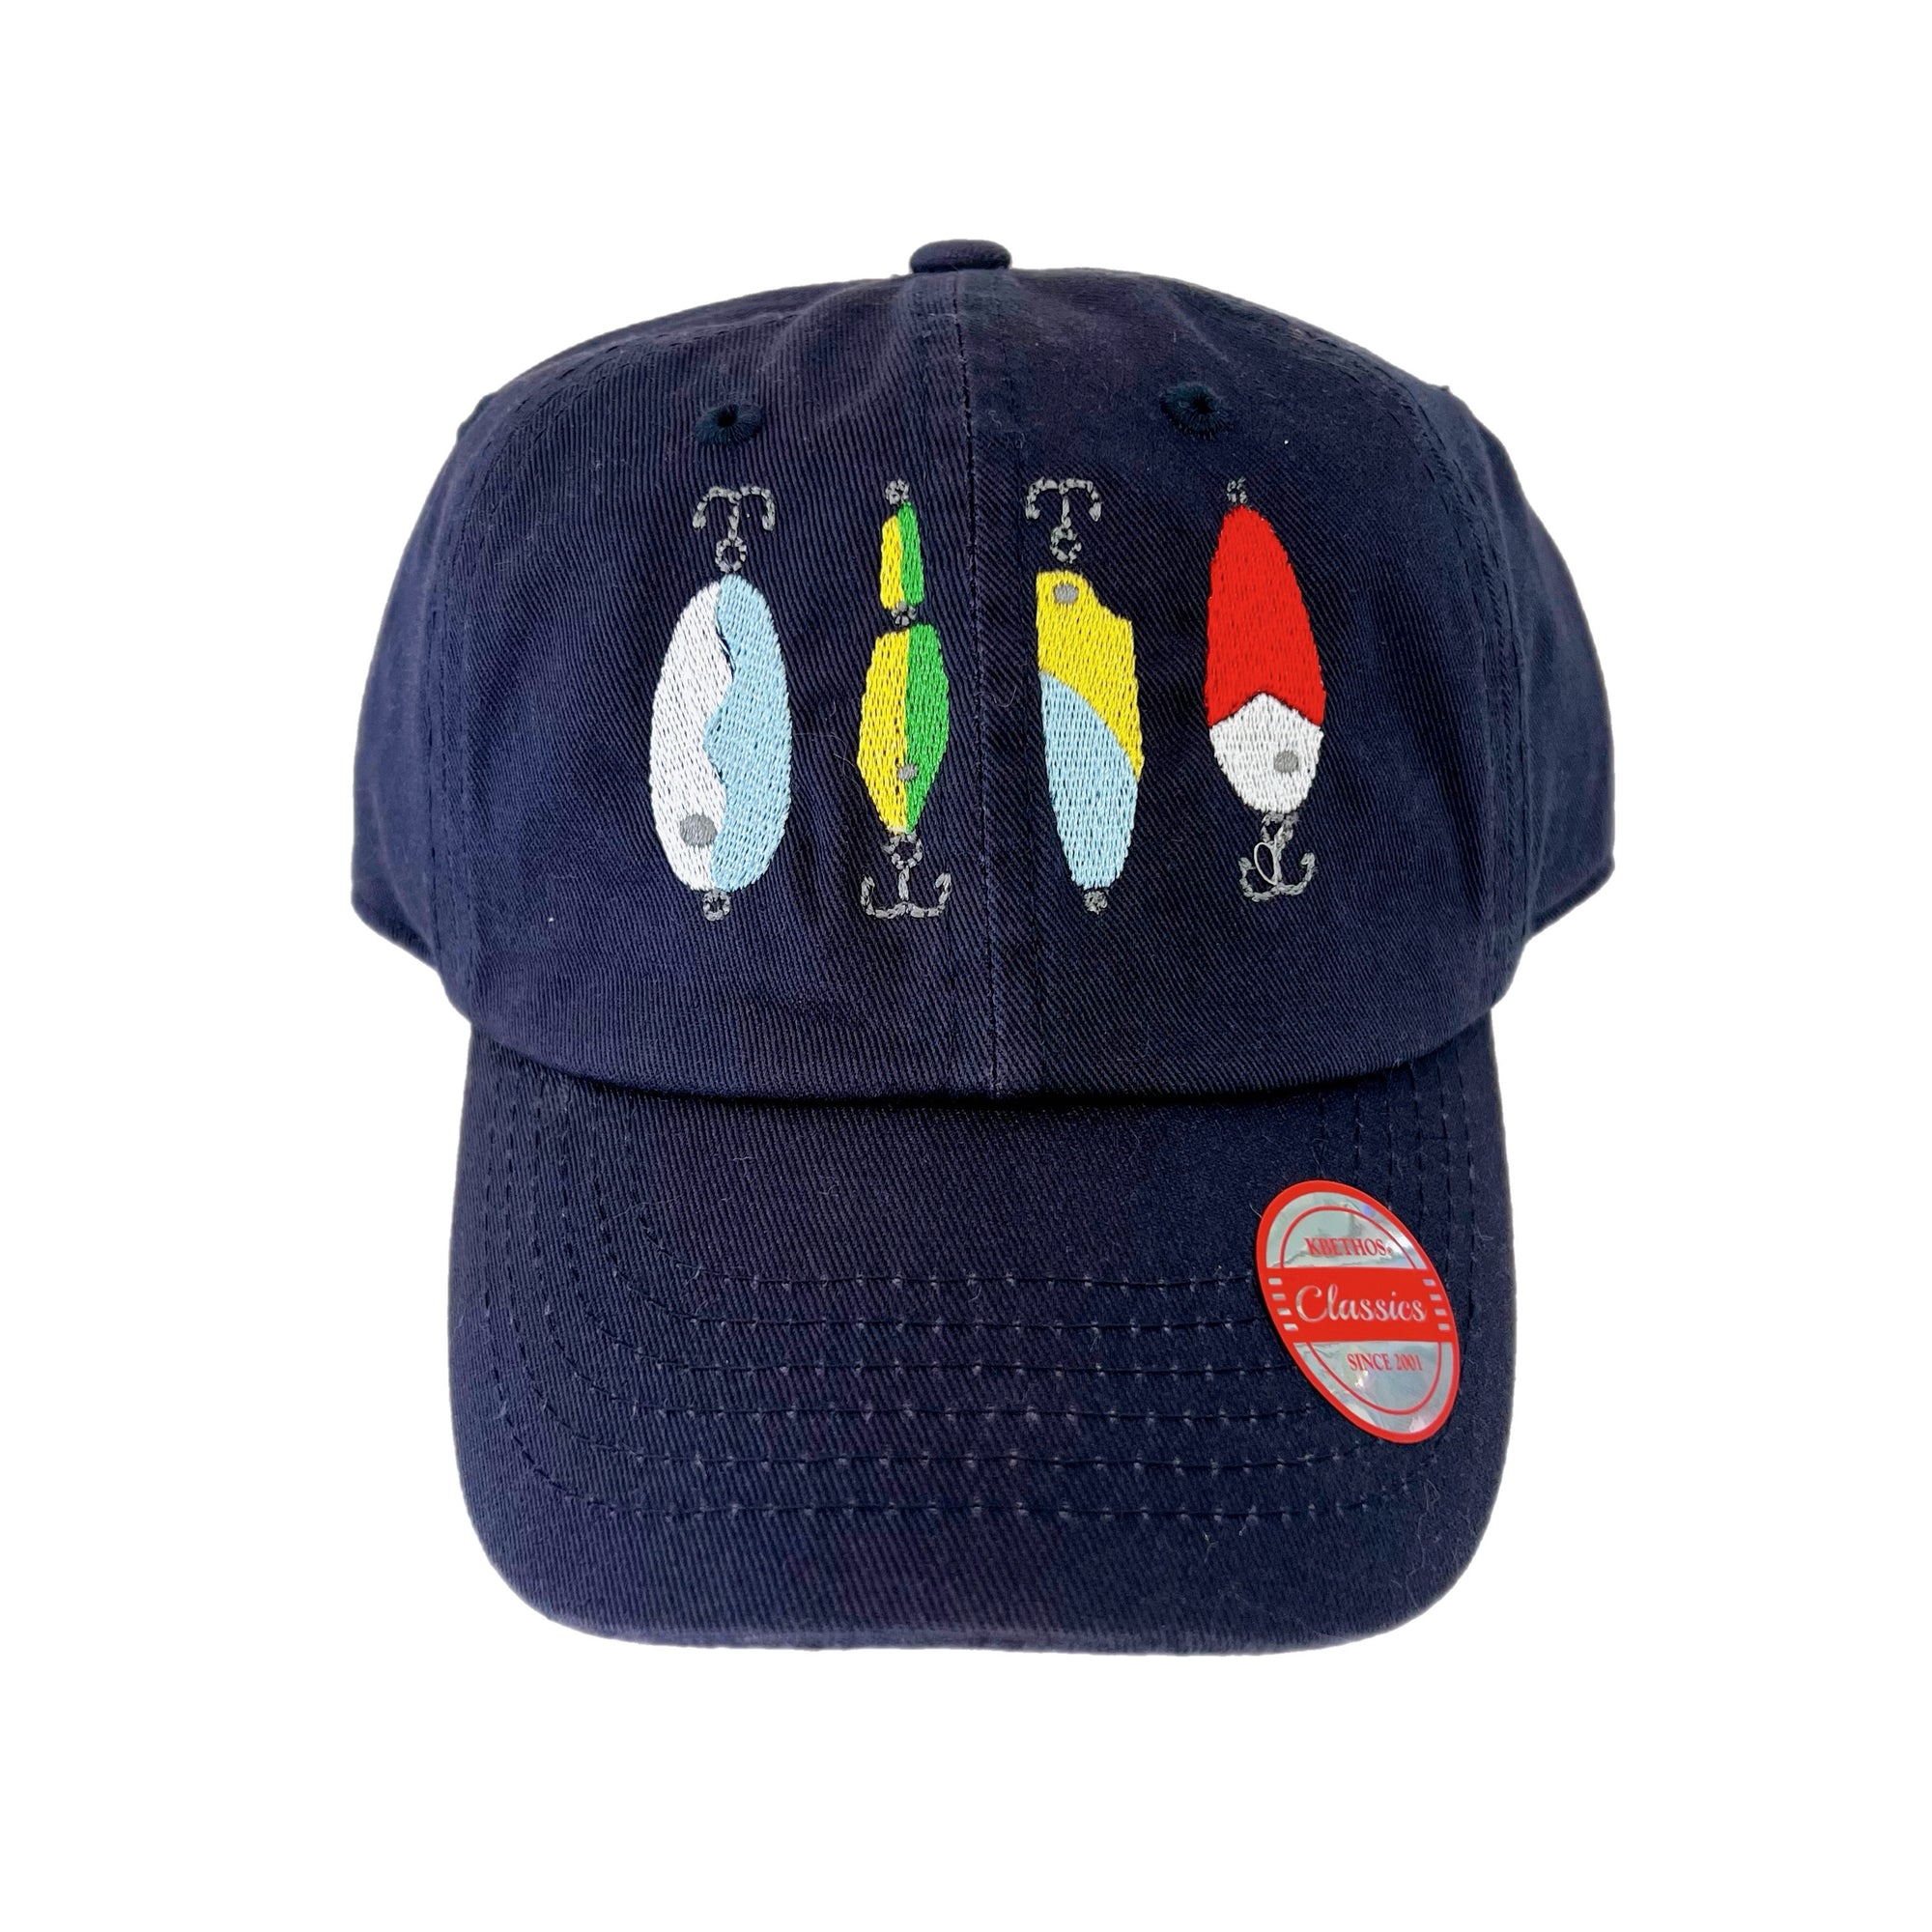 Kids Embroidered Baseball Hat, Fishing Lures